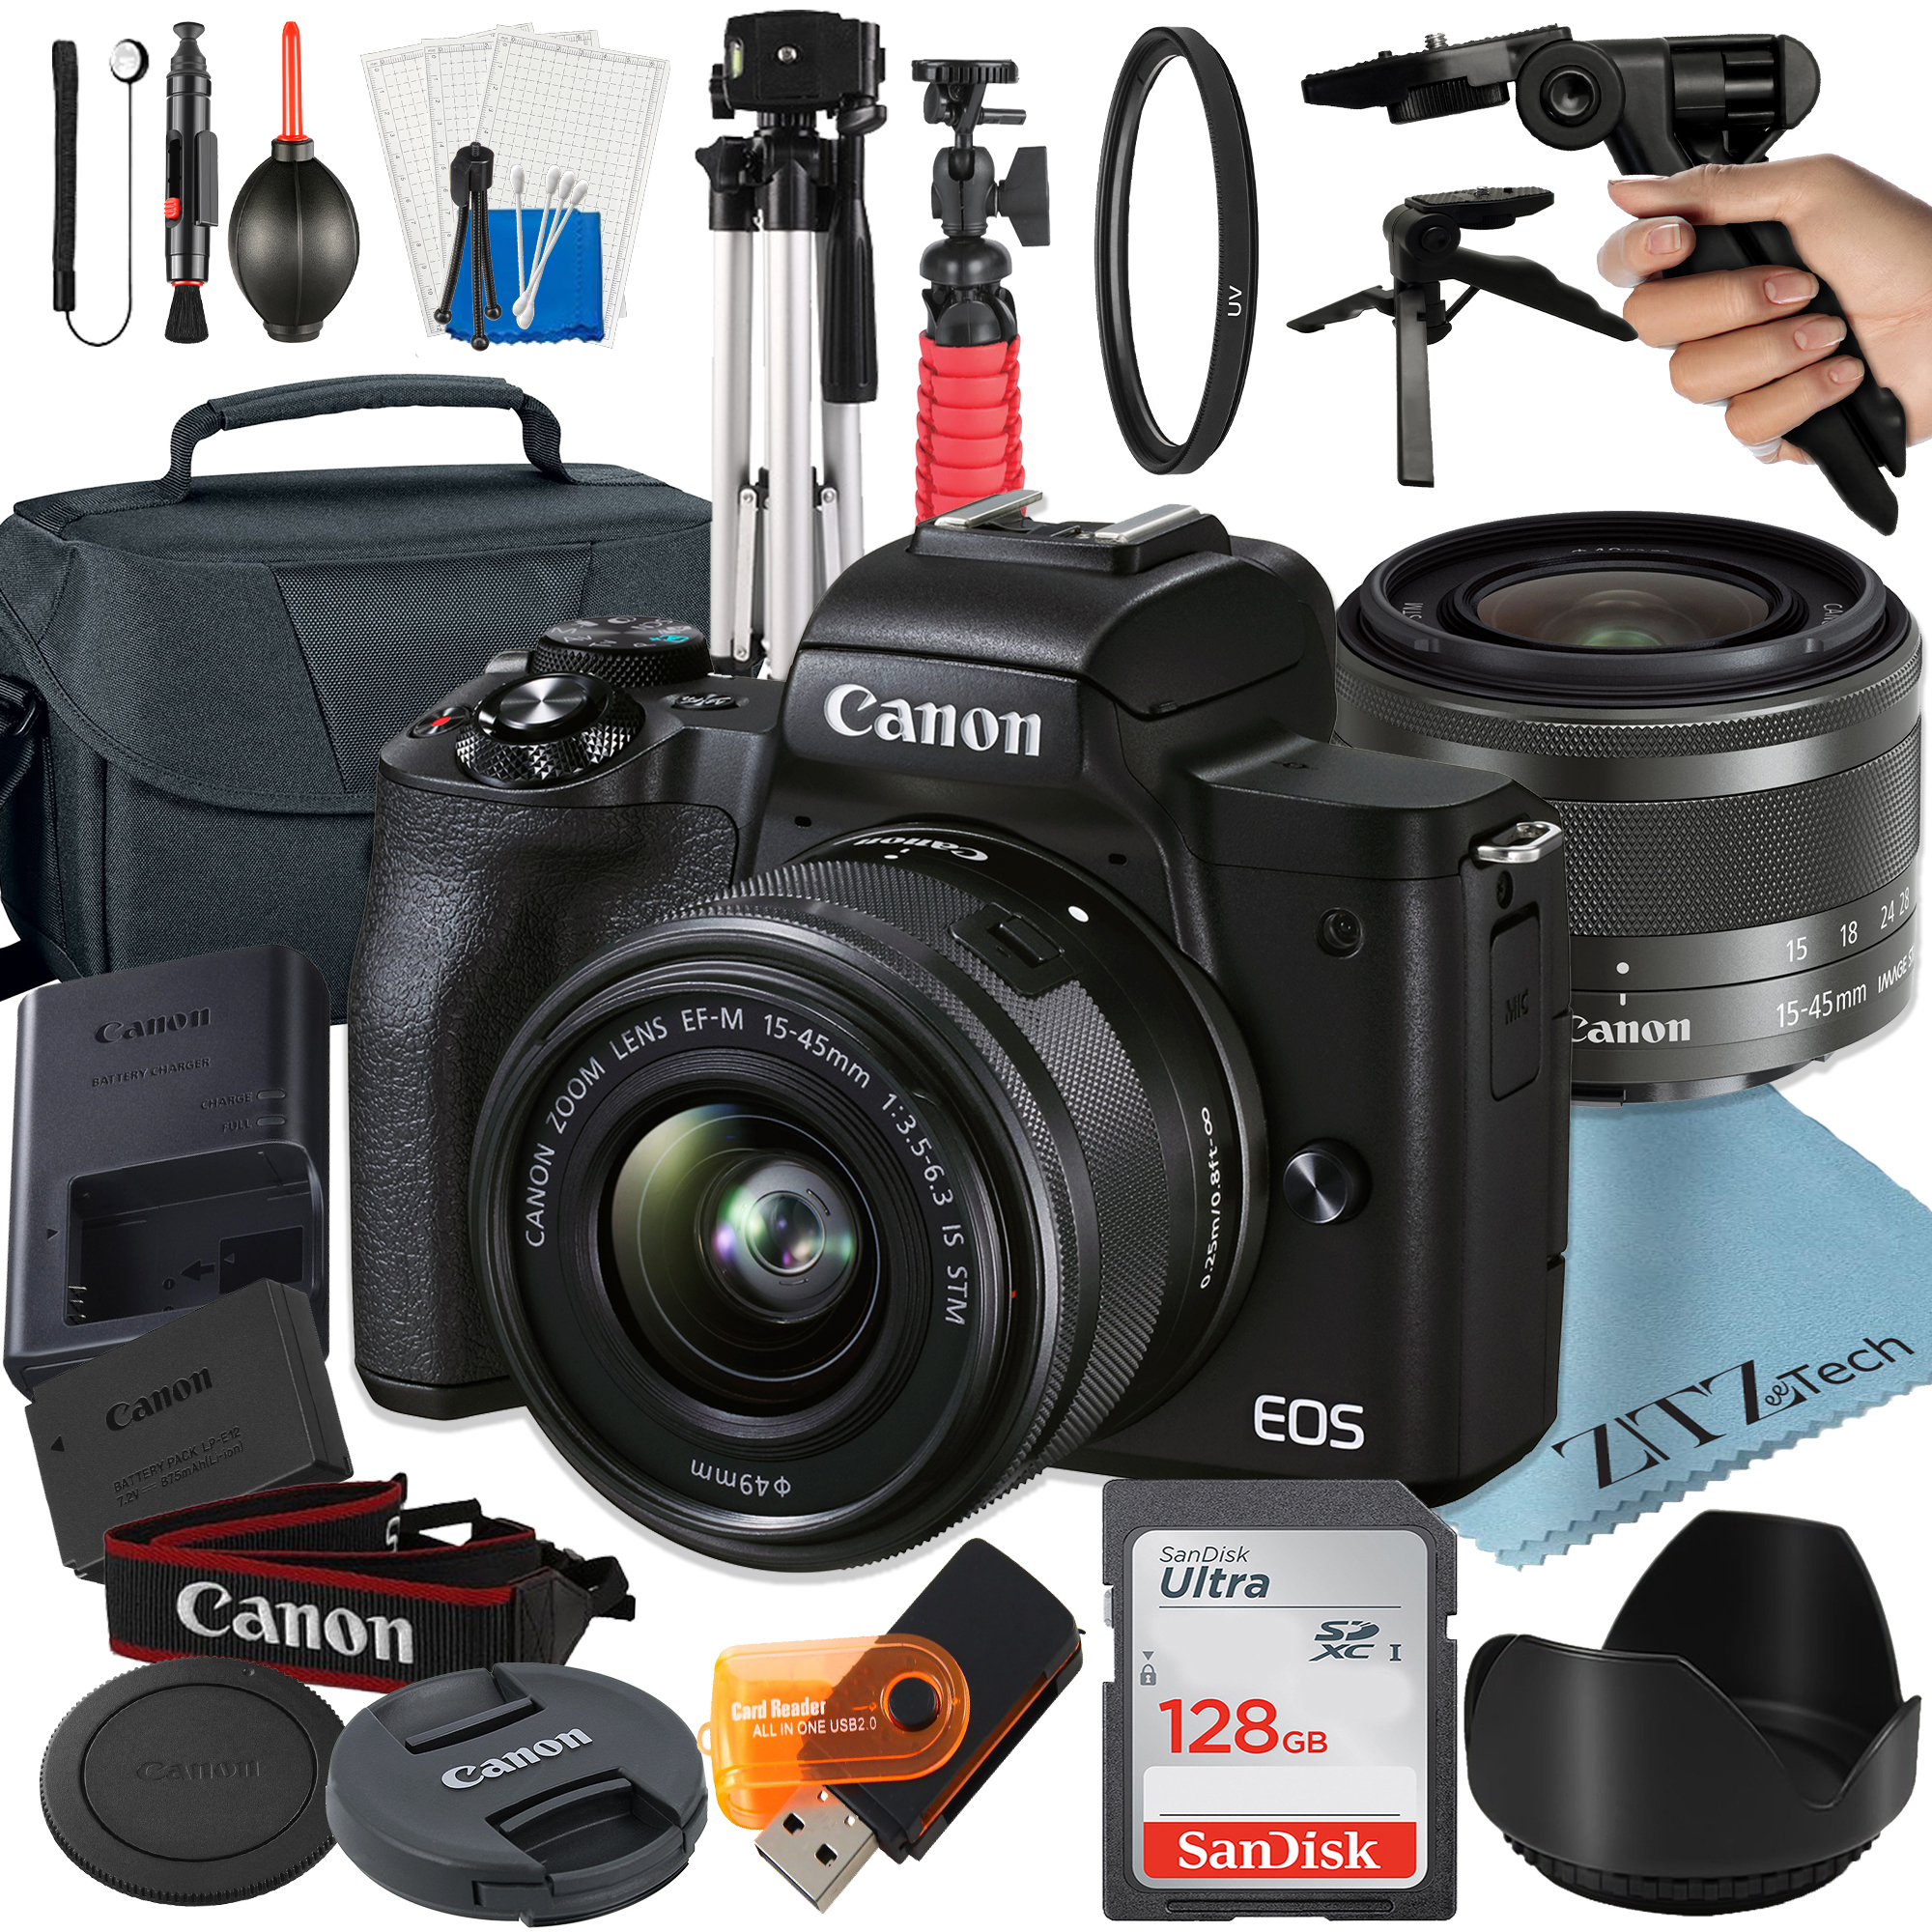 Canon EOS M50 Mark II Mirrorless Camera with 15-45mm Lens + 128GB SanDisk Card + Case + Tripod + ZeeTech Accessory